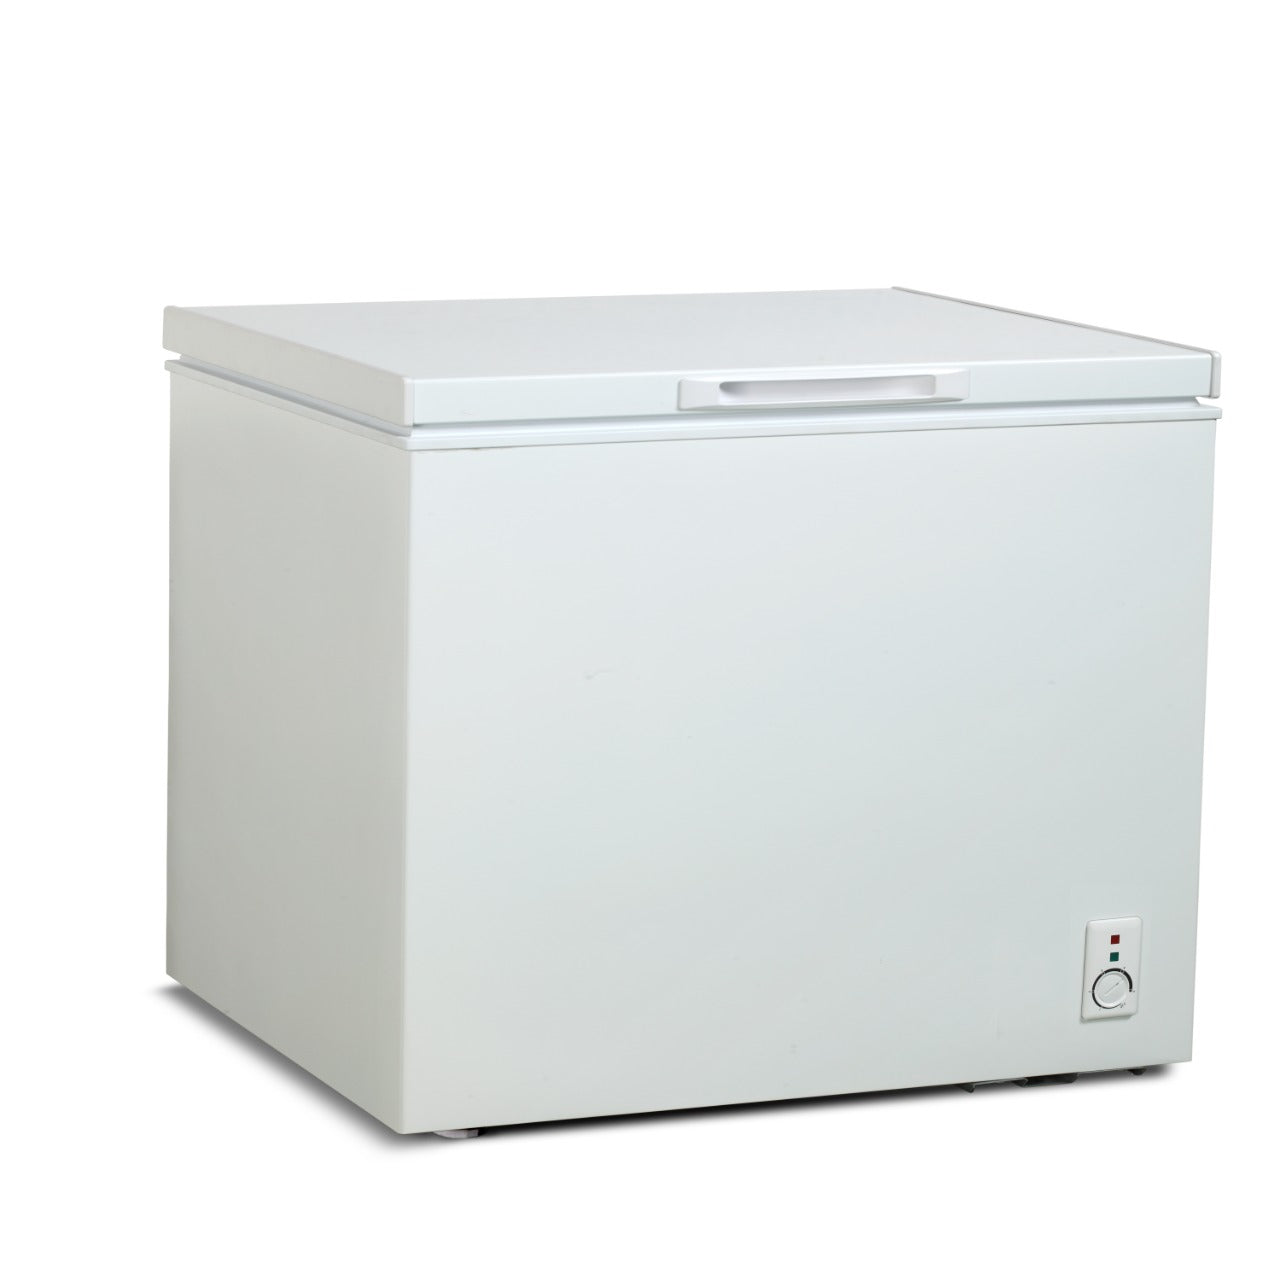 National Deluxe 150L Chest Freezer MF300